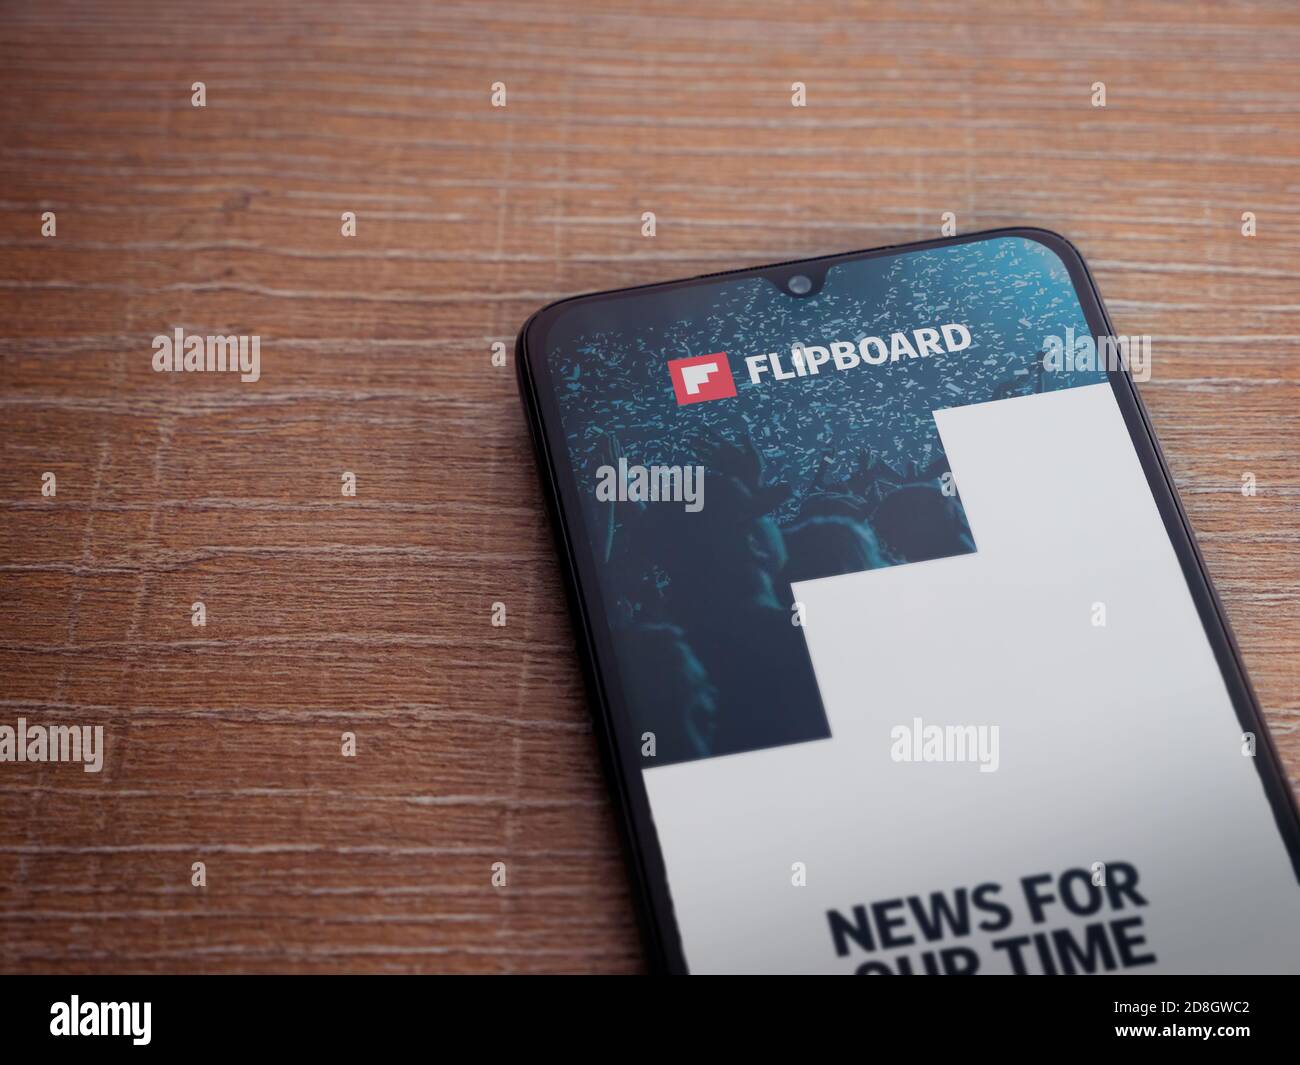 Lod, Israel - July 8, 2020: Flipboard app launch screen with logo on the display of a black mobile smartphone on wooden background. Top view flat lay Stock Photo